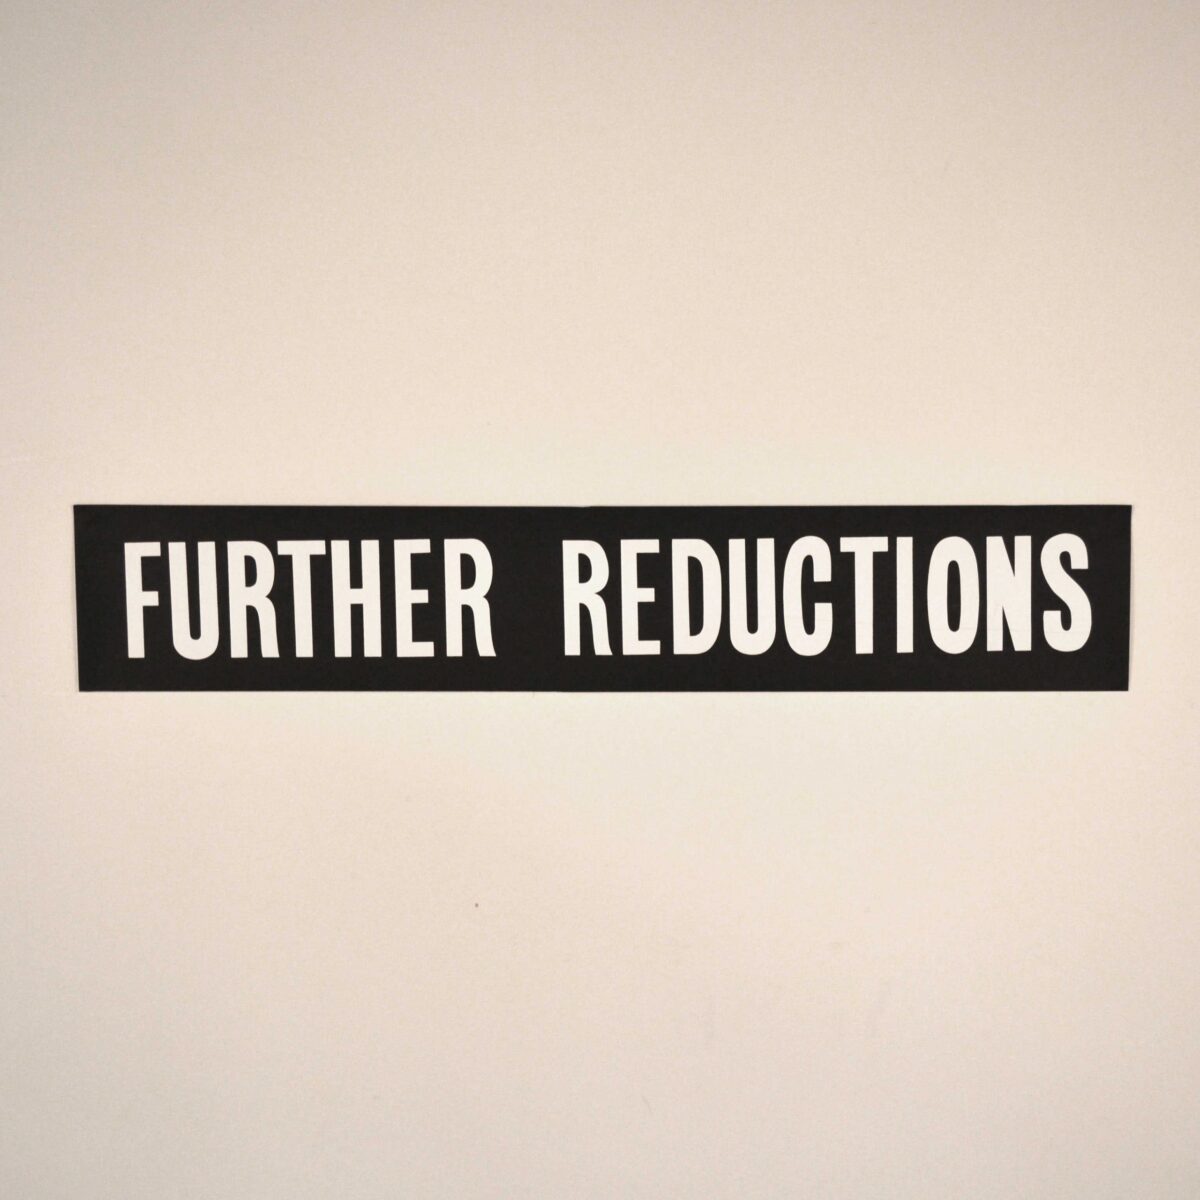 535100 Further Reductions Black Banner scaled